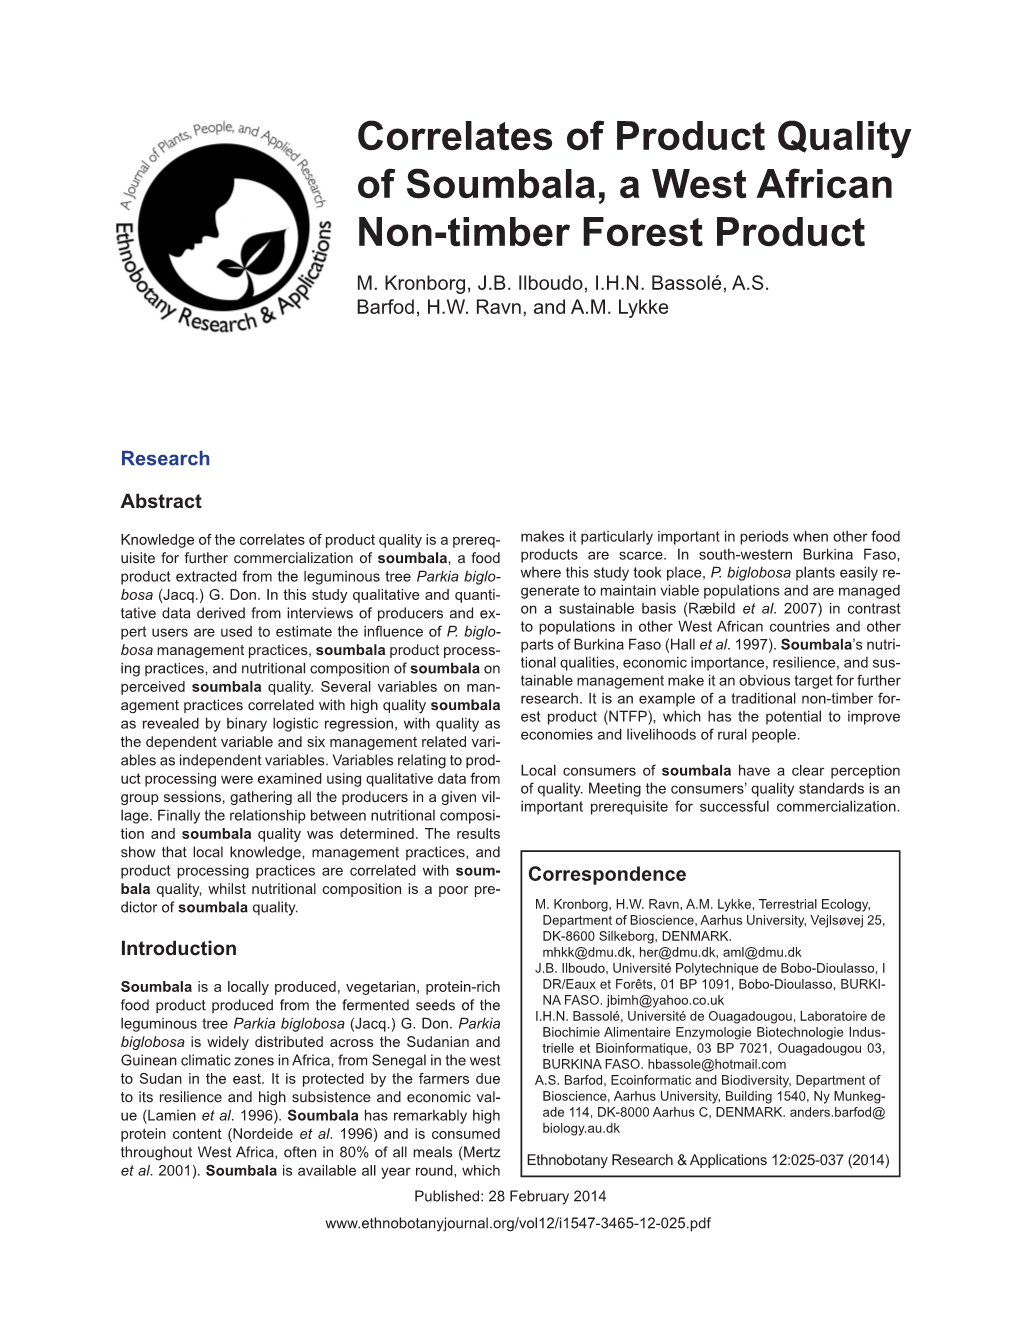 Correlates of Product Quality of Soumbala, a West African Non-Timber Forest Product M